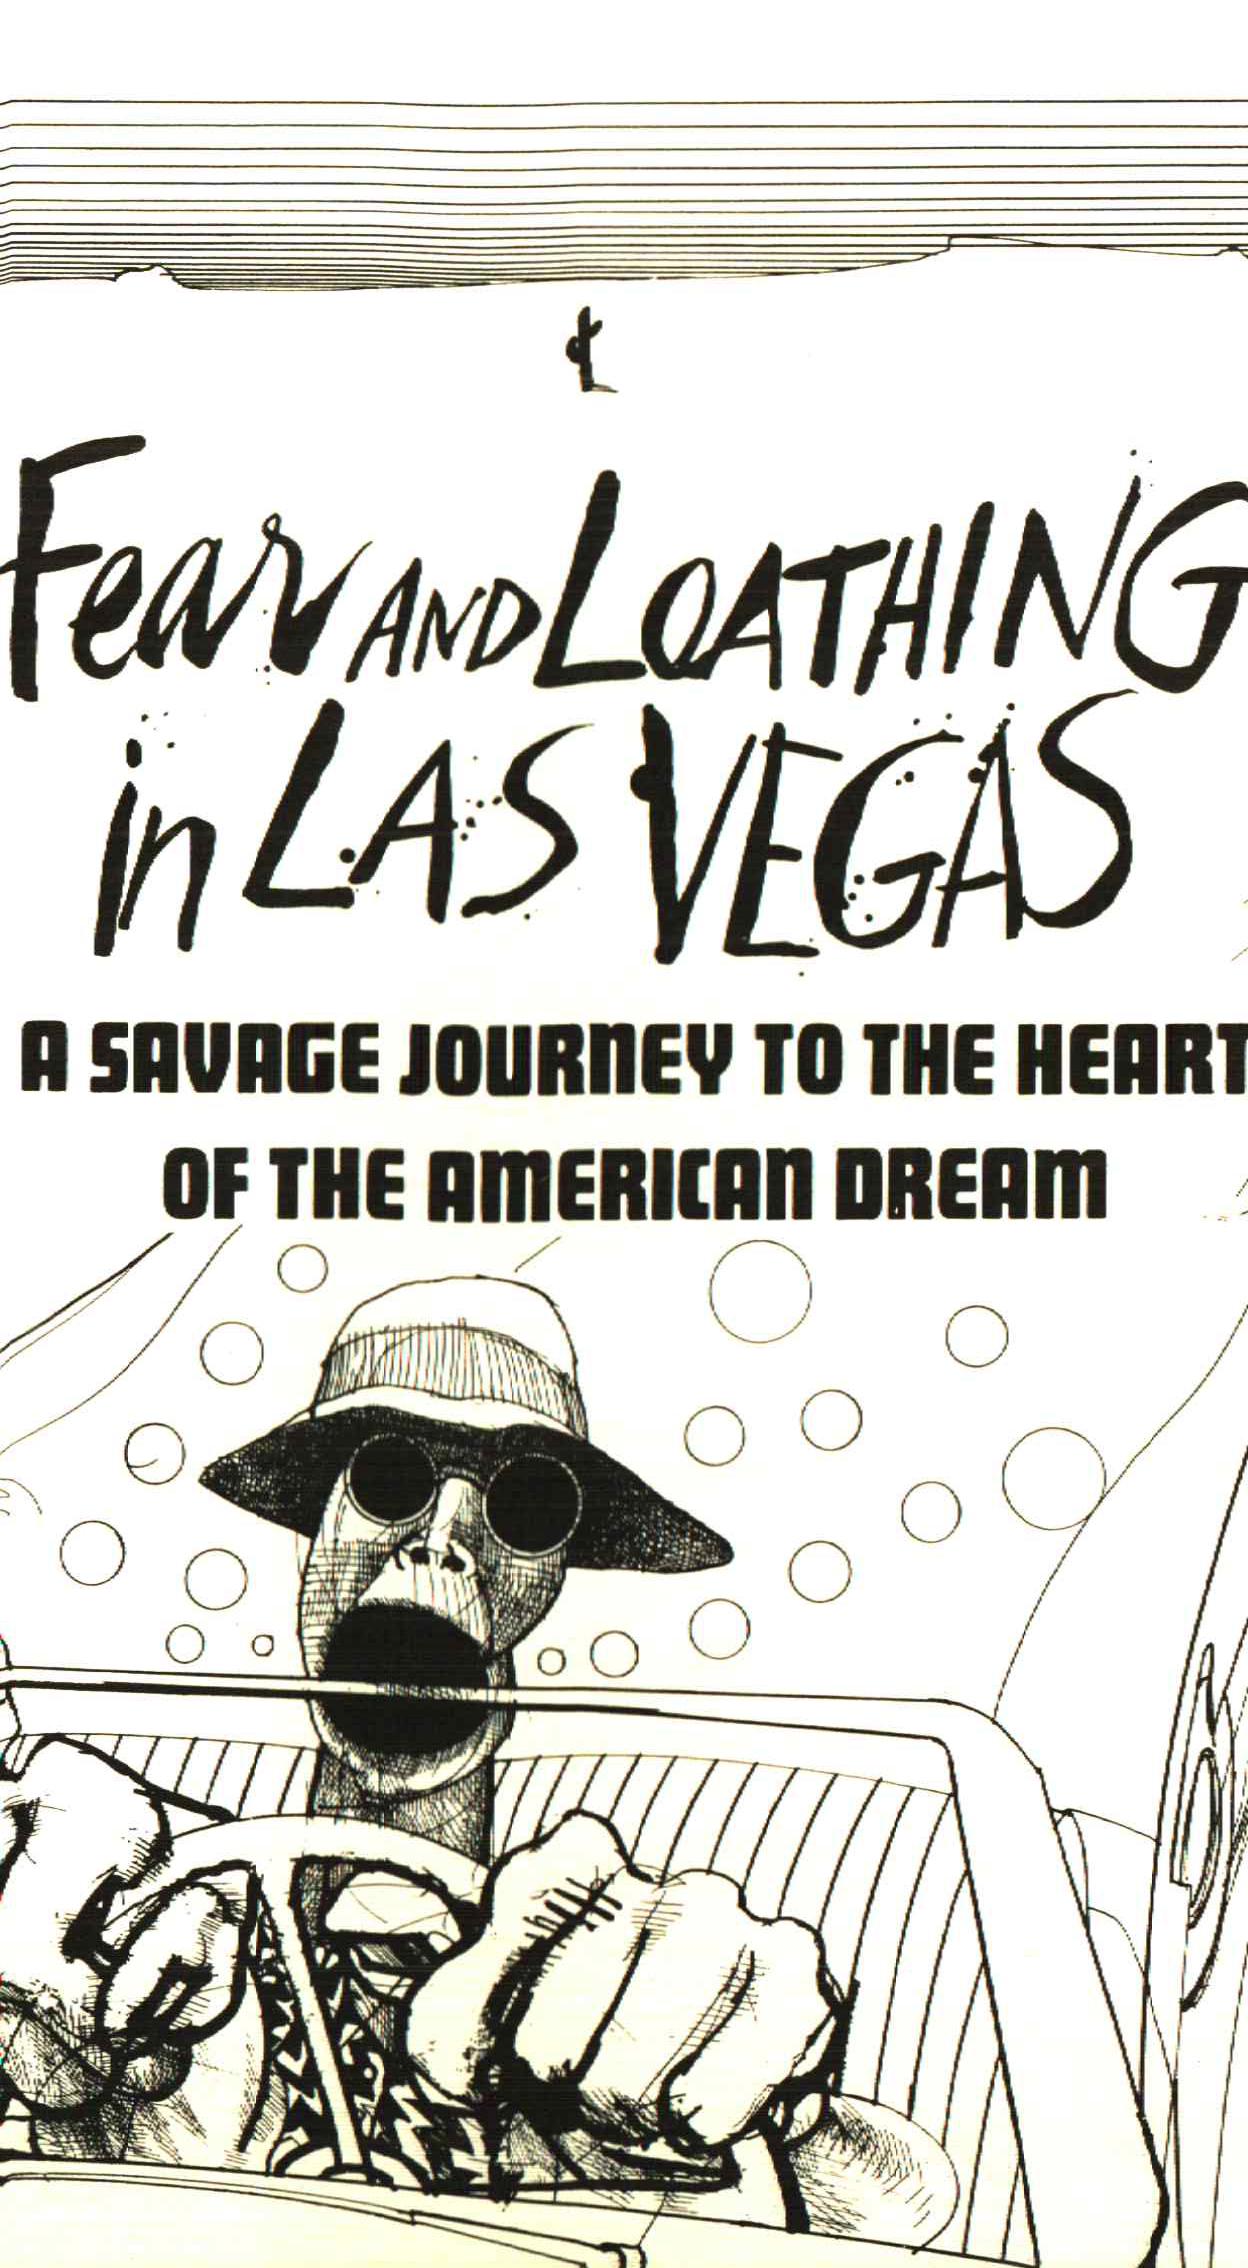 American Hunter S. Thompson's Fear and Loathing in Las Vegas, First Edition 1971